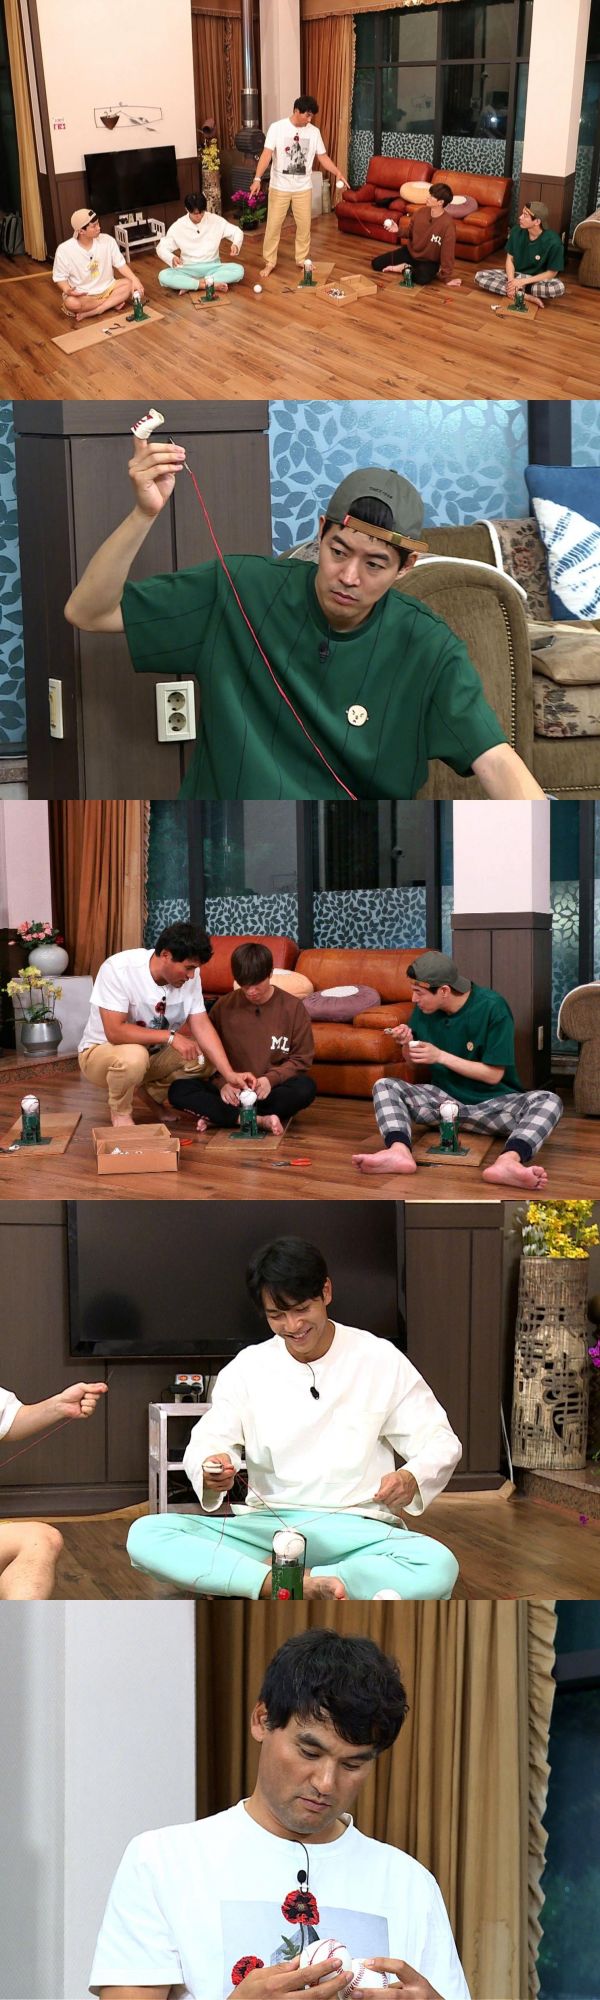 Who is the member who sleeps with All The Butlers Chan Ho Park?In the SBS entertainment program All The Butlers, which will be broadcast on the evening of the 27th, the members and the game of the sleeping game of TMT (Two Murch Talkers) Master Chan Ho Park will be released.In a recent recording, All The Butlers Lee Seung-gi, Lee Sang-yoon, Yook Sungjae, and Yang Se-hyeong spent a day in the princess, the roots of Master Chan Ho Park.Chan Ho Park, who arrived at the hostel after his work, said, I have to talk about it, despite the fact that there are many rooms.Eventually, they decided to play a game of baseball stitching to decide a member to sleep with Master Chan Ho Park.In particular, Chan Ho Park started the game without telling him how to become a sleeping member.The members struggled more than ever to avoid being selected as a sleeping member, saying, It seems to be bleeding from my ears and It is the first time I have heard such a scary thing to say.The members began to fight fierce brains, checking each other.In particular, Lee Seung-gi, usually called passion victory, strongly denied that Chan Ho Parks praise of good was no and made everyone laugh.In addition, Yook Sungjae, who has a good hand, said that he could not stitch better than he thought, saying, The castle is not deliberately.Yook Sungjae said, Sang Yoon-yi has a lot of words before he sleeps. He actively recommended Chan Ho Park as a sleeping member and laughed.However, Chan Ho Park said that he would help the members who did not sew the most, and that he gave a shocking reversal by setting them as co-members.